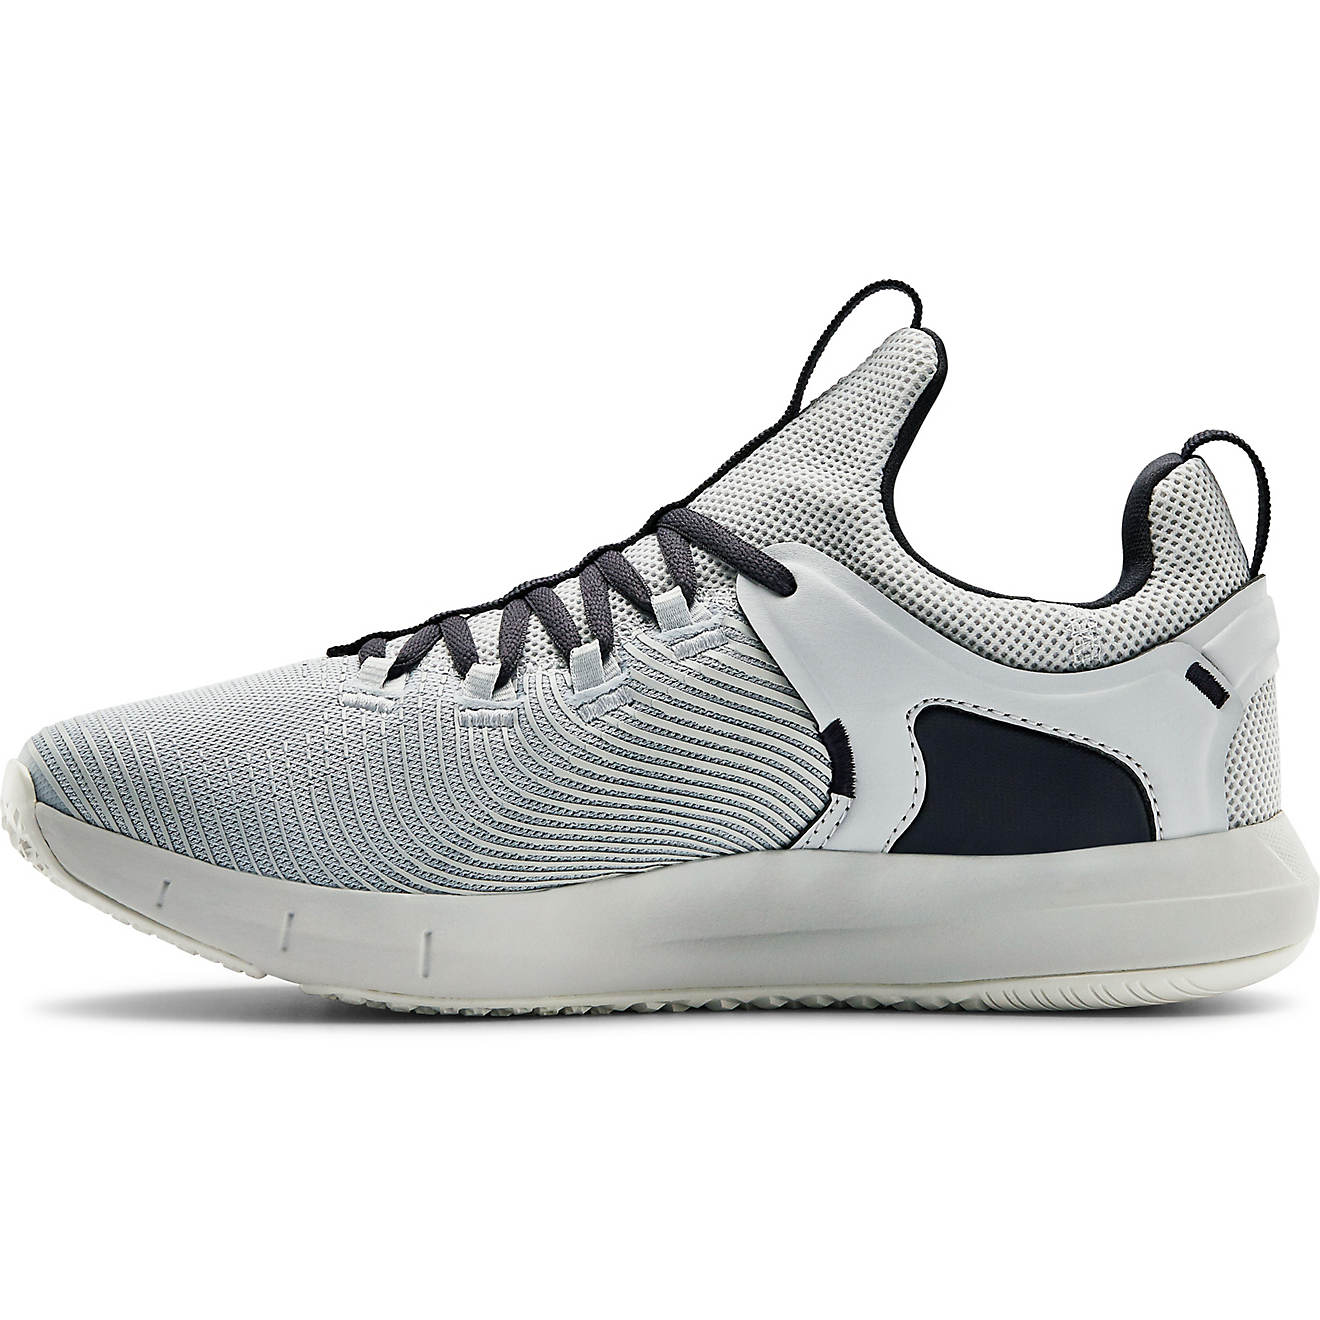 Under Armour Men's HOVR Rise 2 Training Shoes | Academy